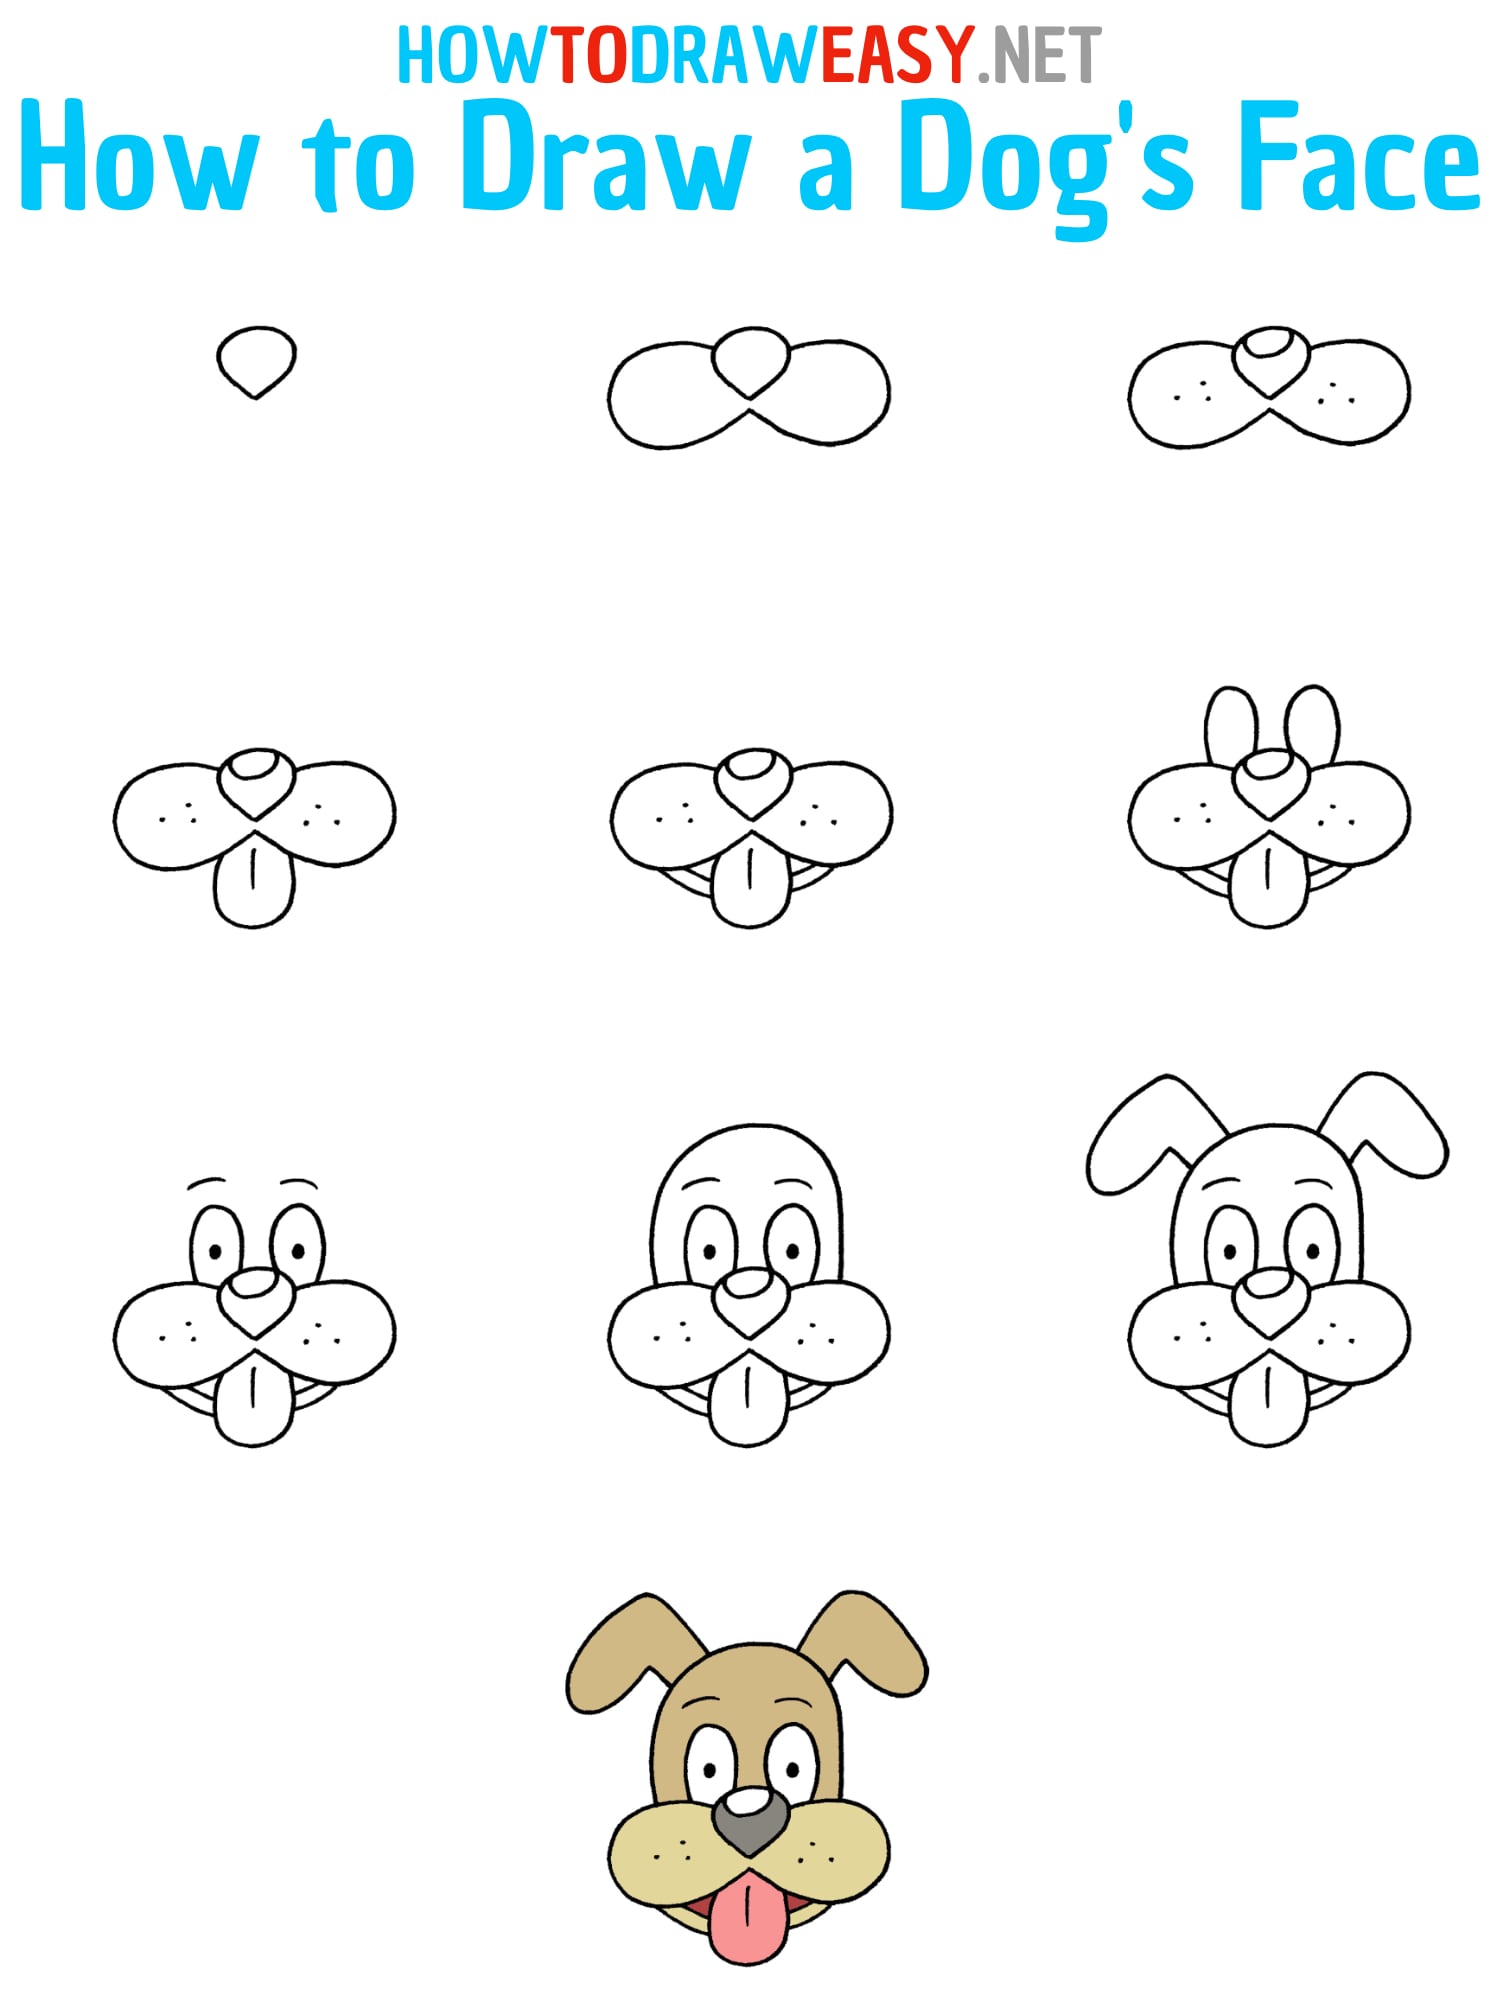 How to Draw a Dog Face Step by Step